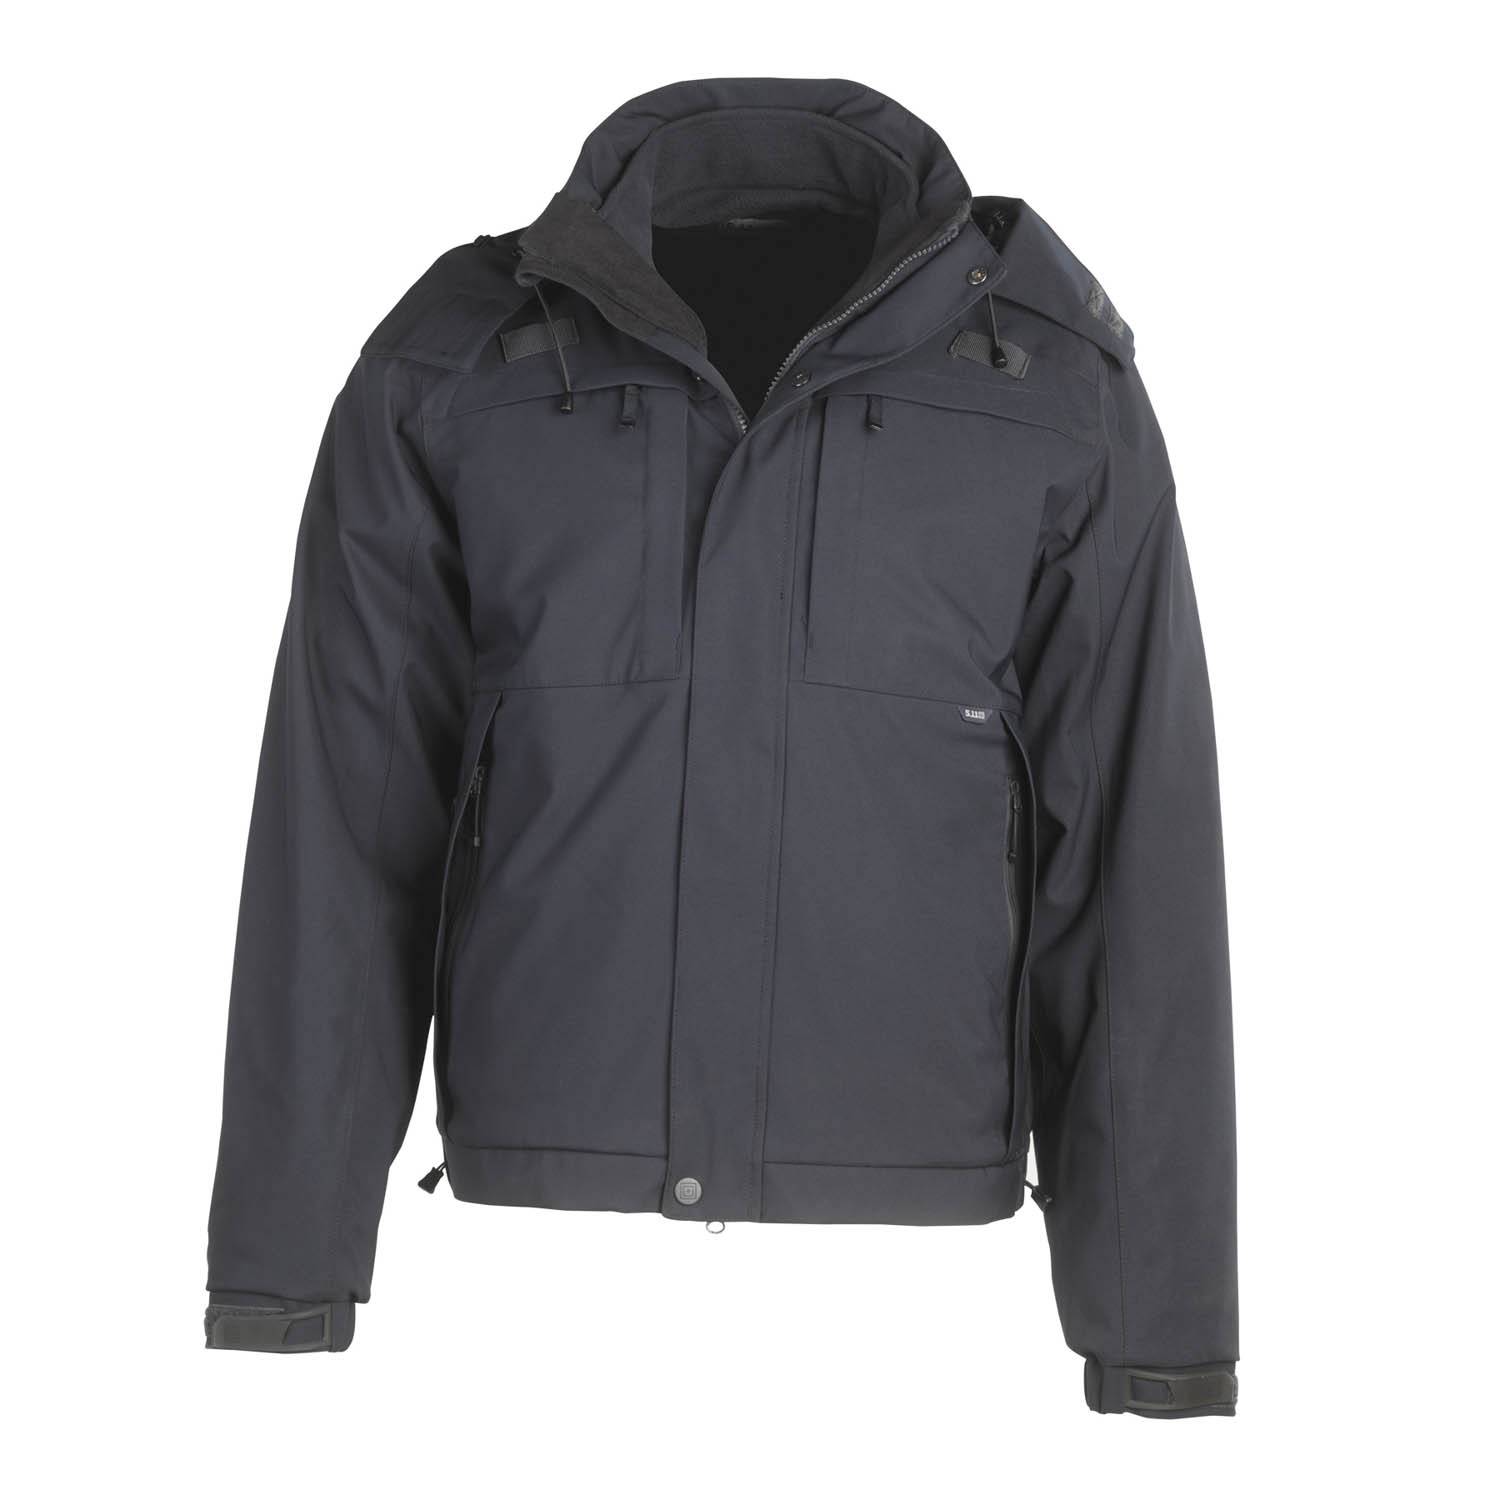 5.11 Tactical 5-In-1 Jacket 2.0